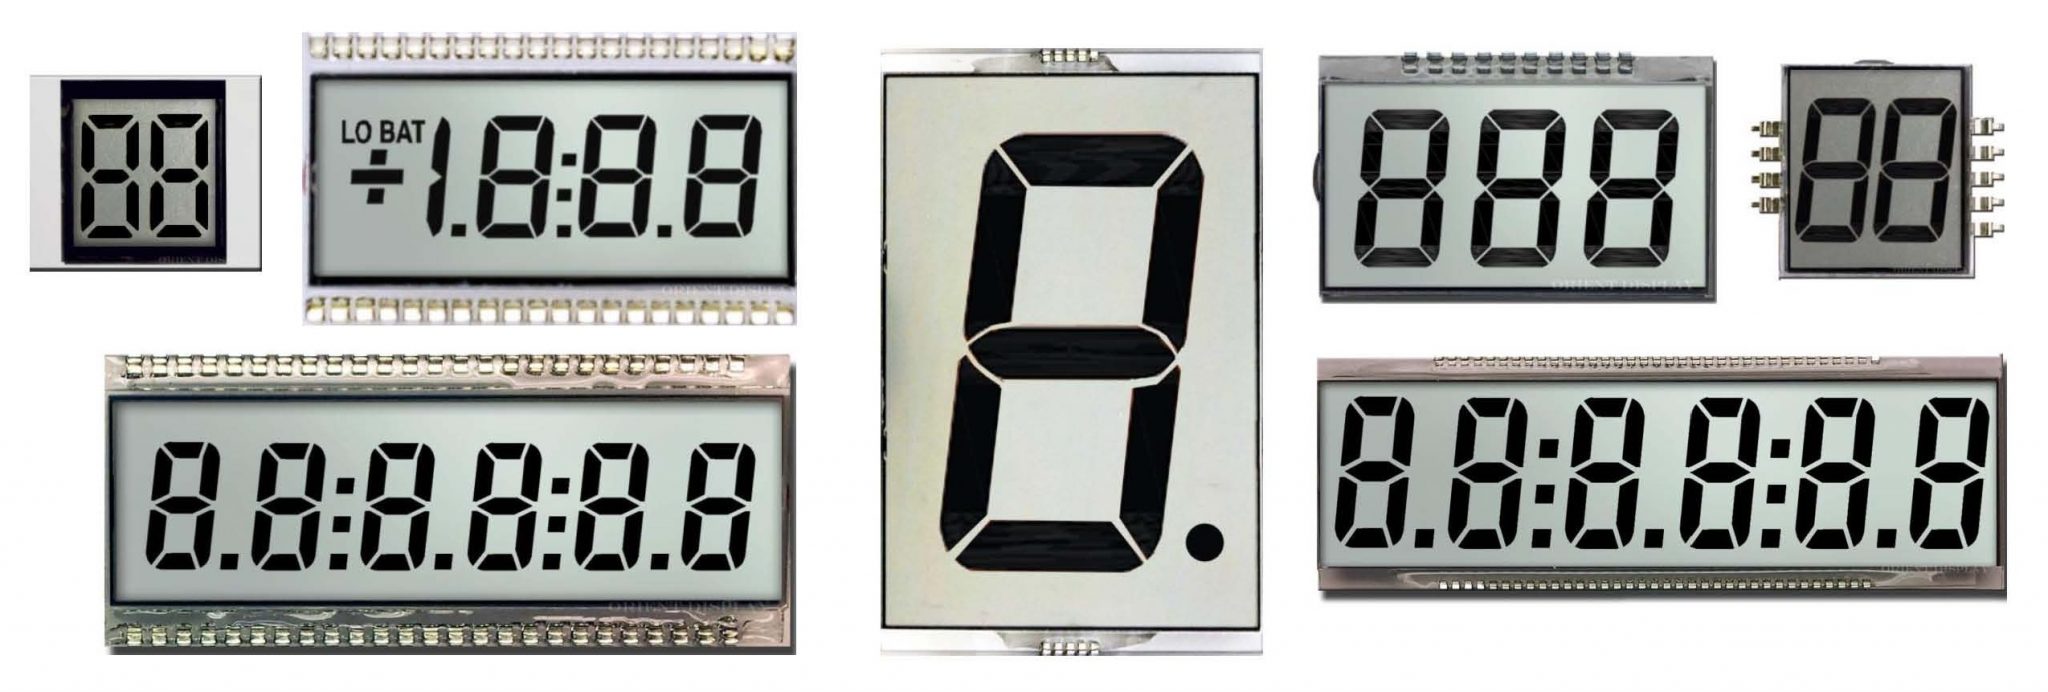 Orient Display: LCD Glass Panels/Segment LCD Display - 1 to 8 digits, TN positive LCD mode, multiple choices of sizes